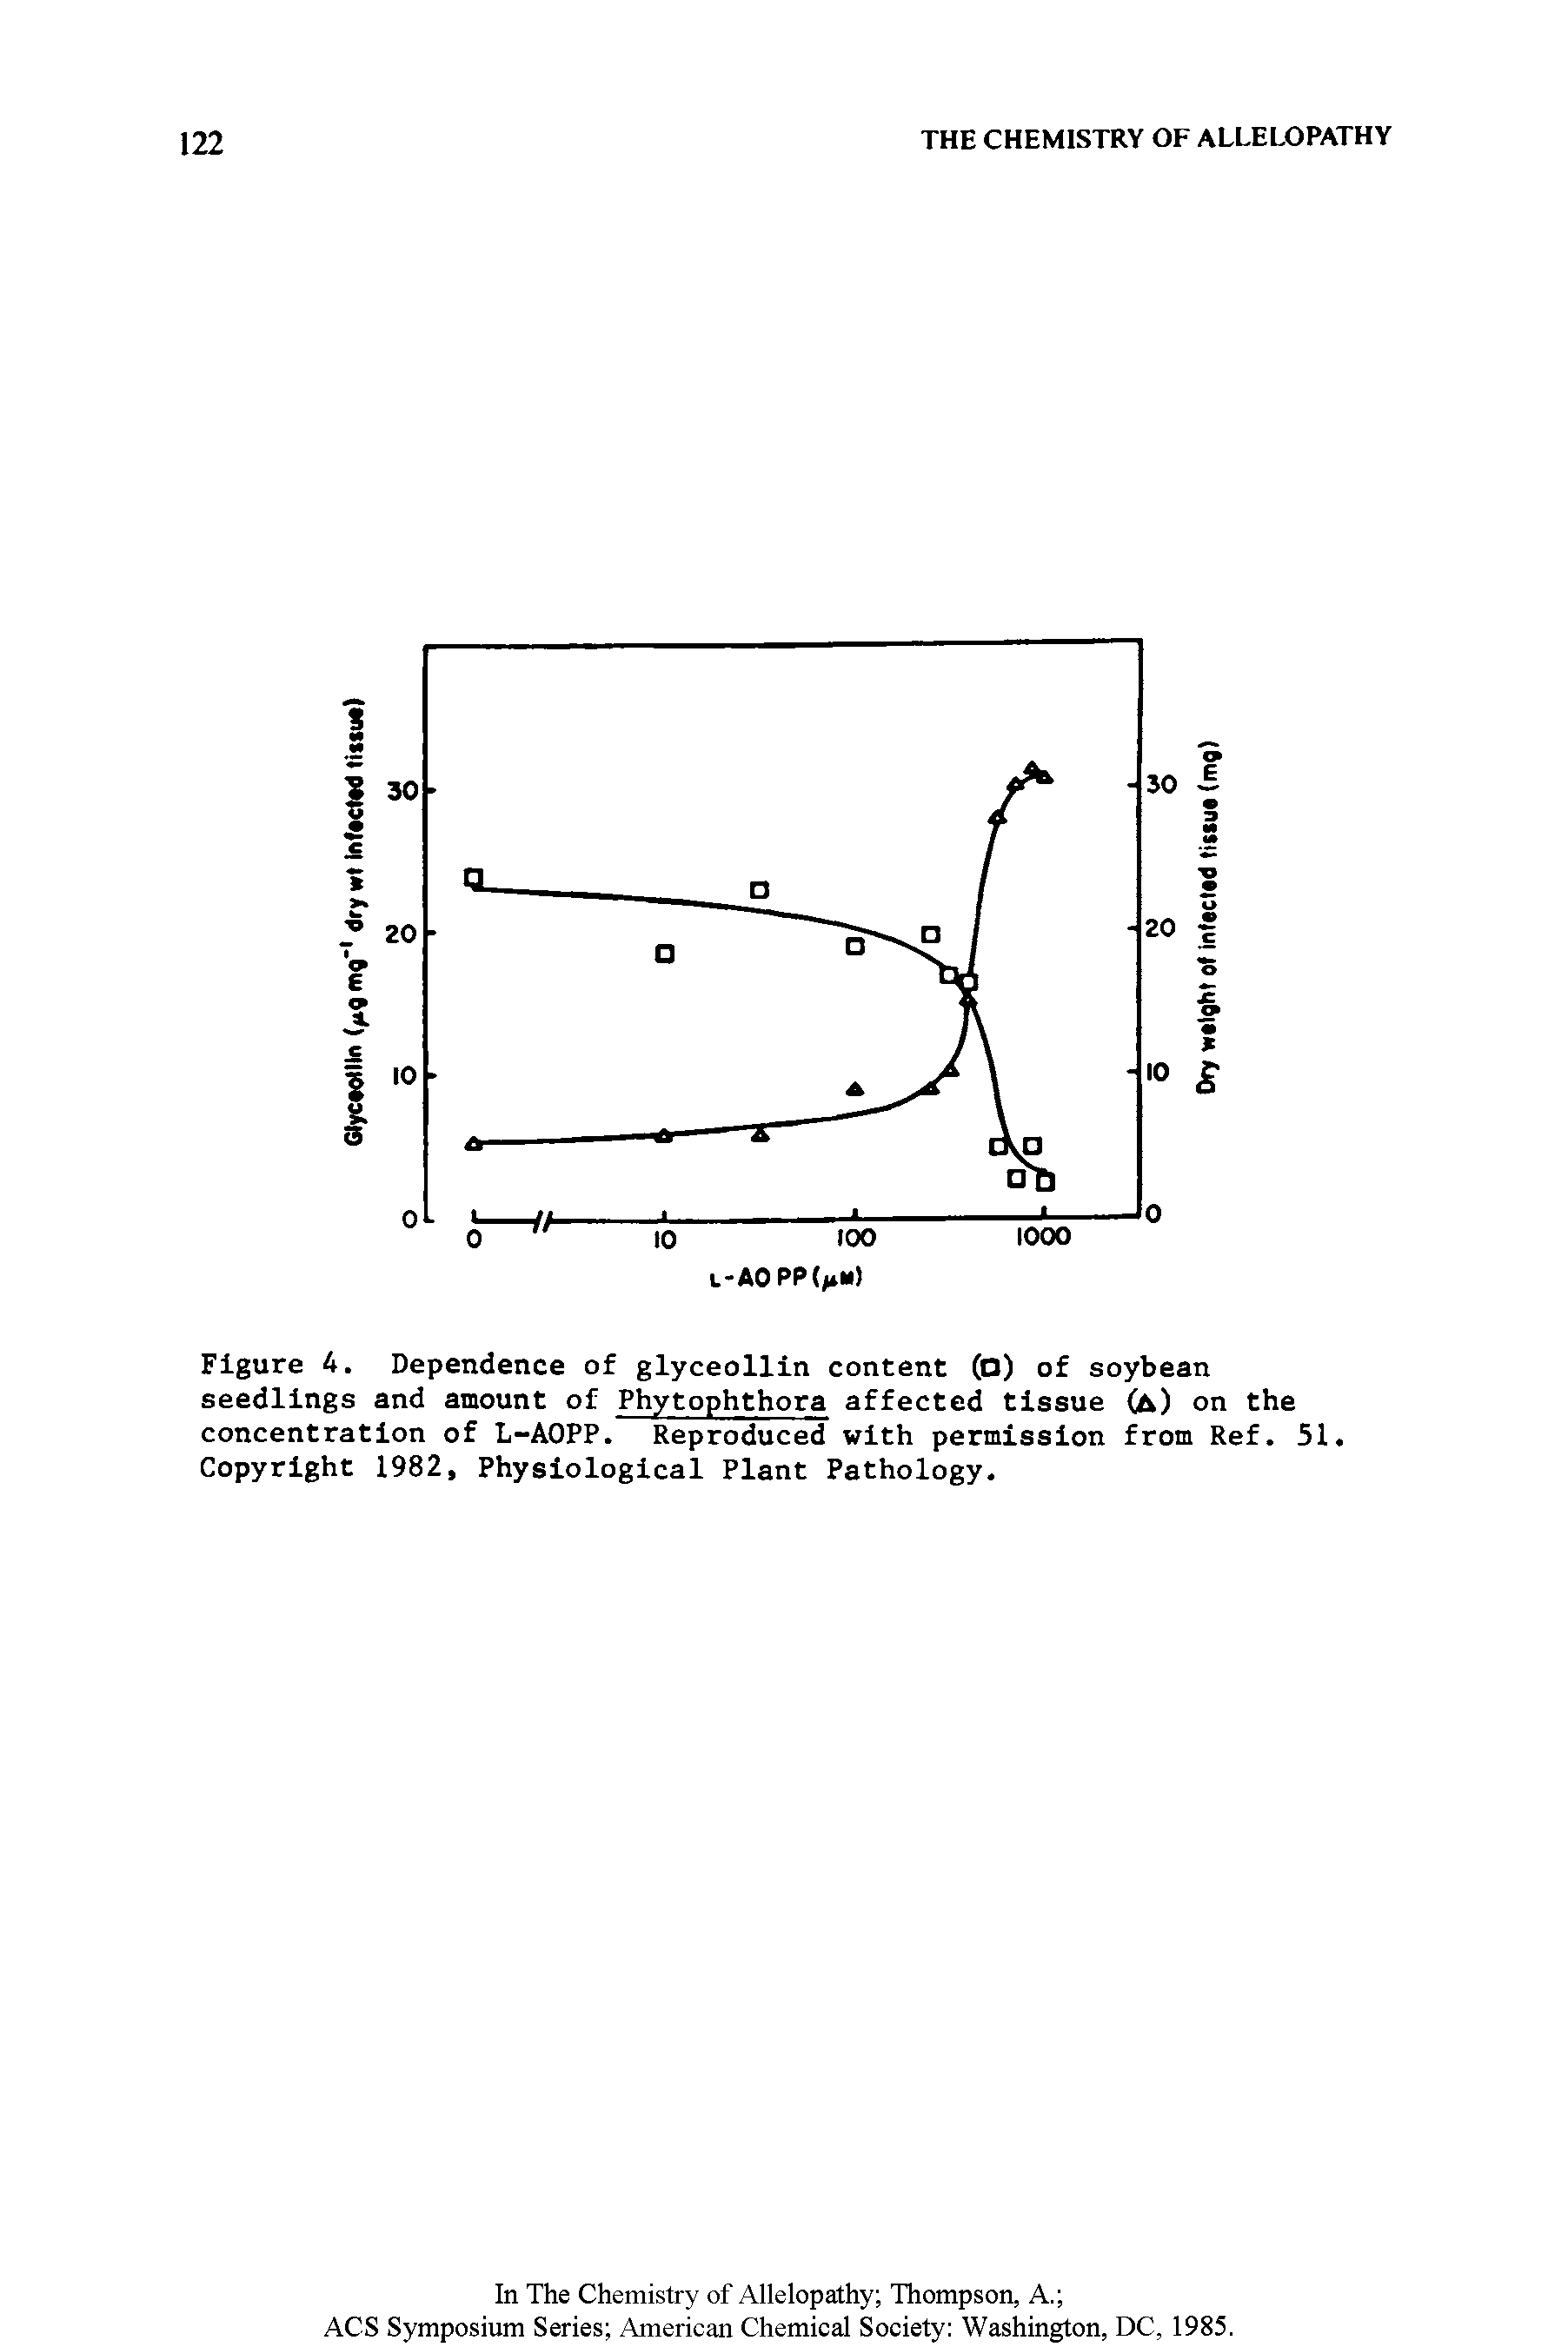 Figure 4. Dependence of glyceollin content (Q) of soybean seedlings and amount of Phytophthora affected tissue (a) on the concentration of L-AOPP. Reproduced with permission from Ref. 51. Copyright 1982, Physiological Plant Pathology.